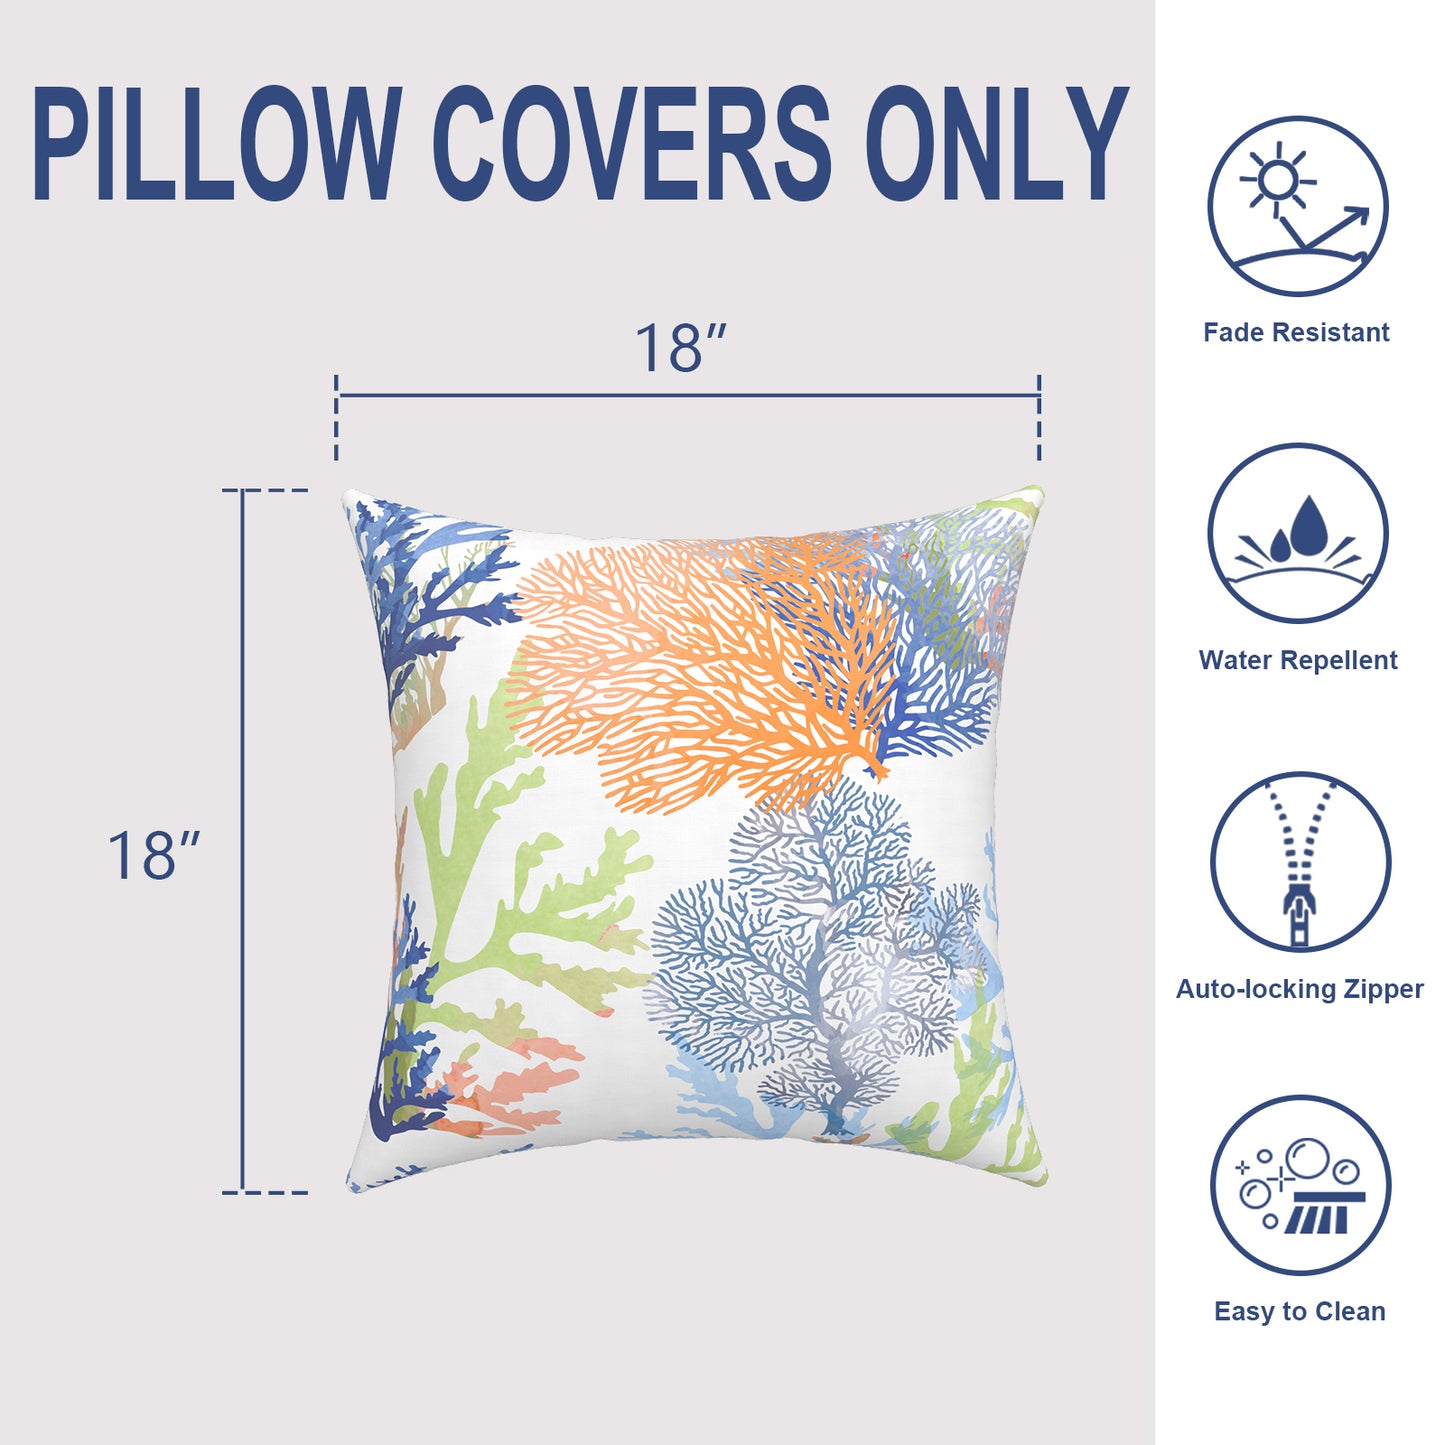 Melody Elephant Outdoor Throw Pillow Covers Pack of 2, Decorative Water Repellent Square Pillow Cases 18x18 Inch, Patio Pillowcases for Home Patio Furniture Use, Coral Multi